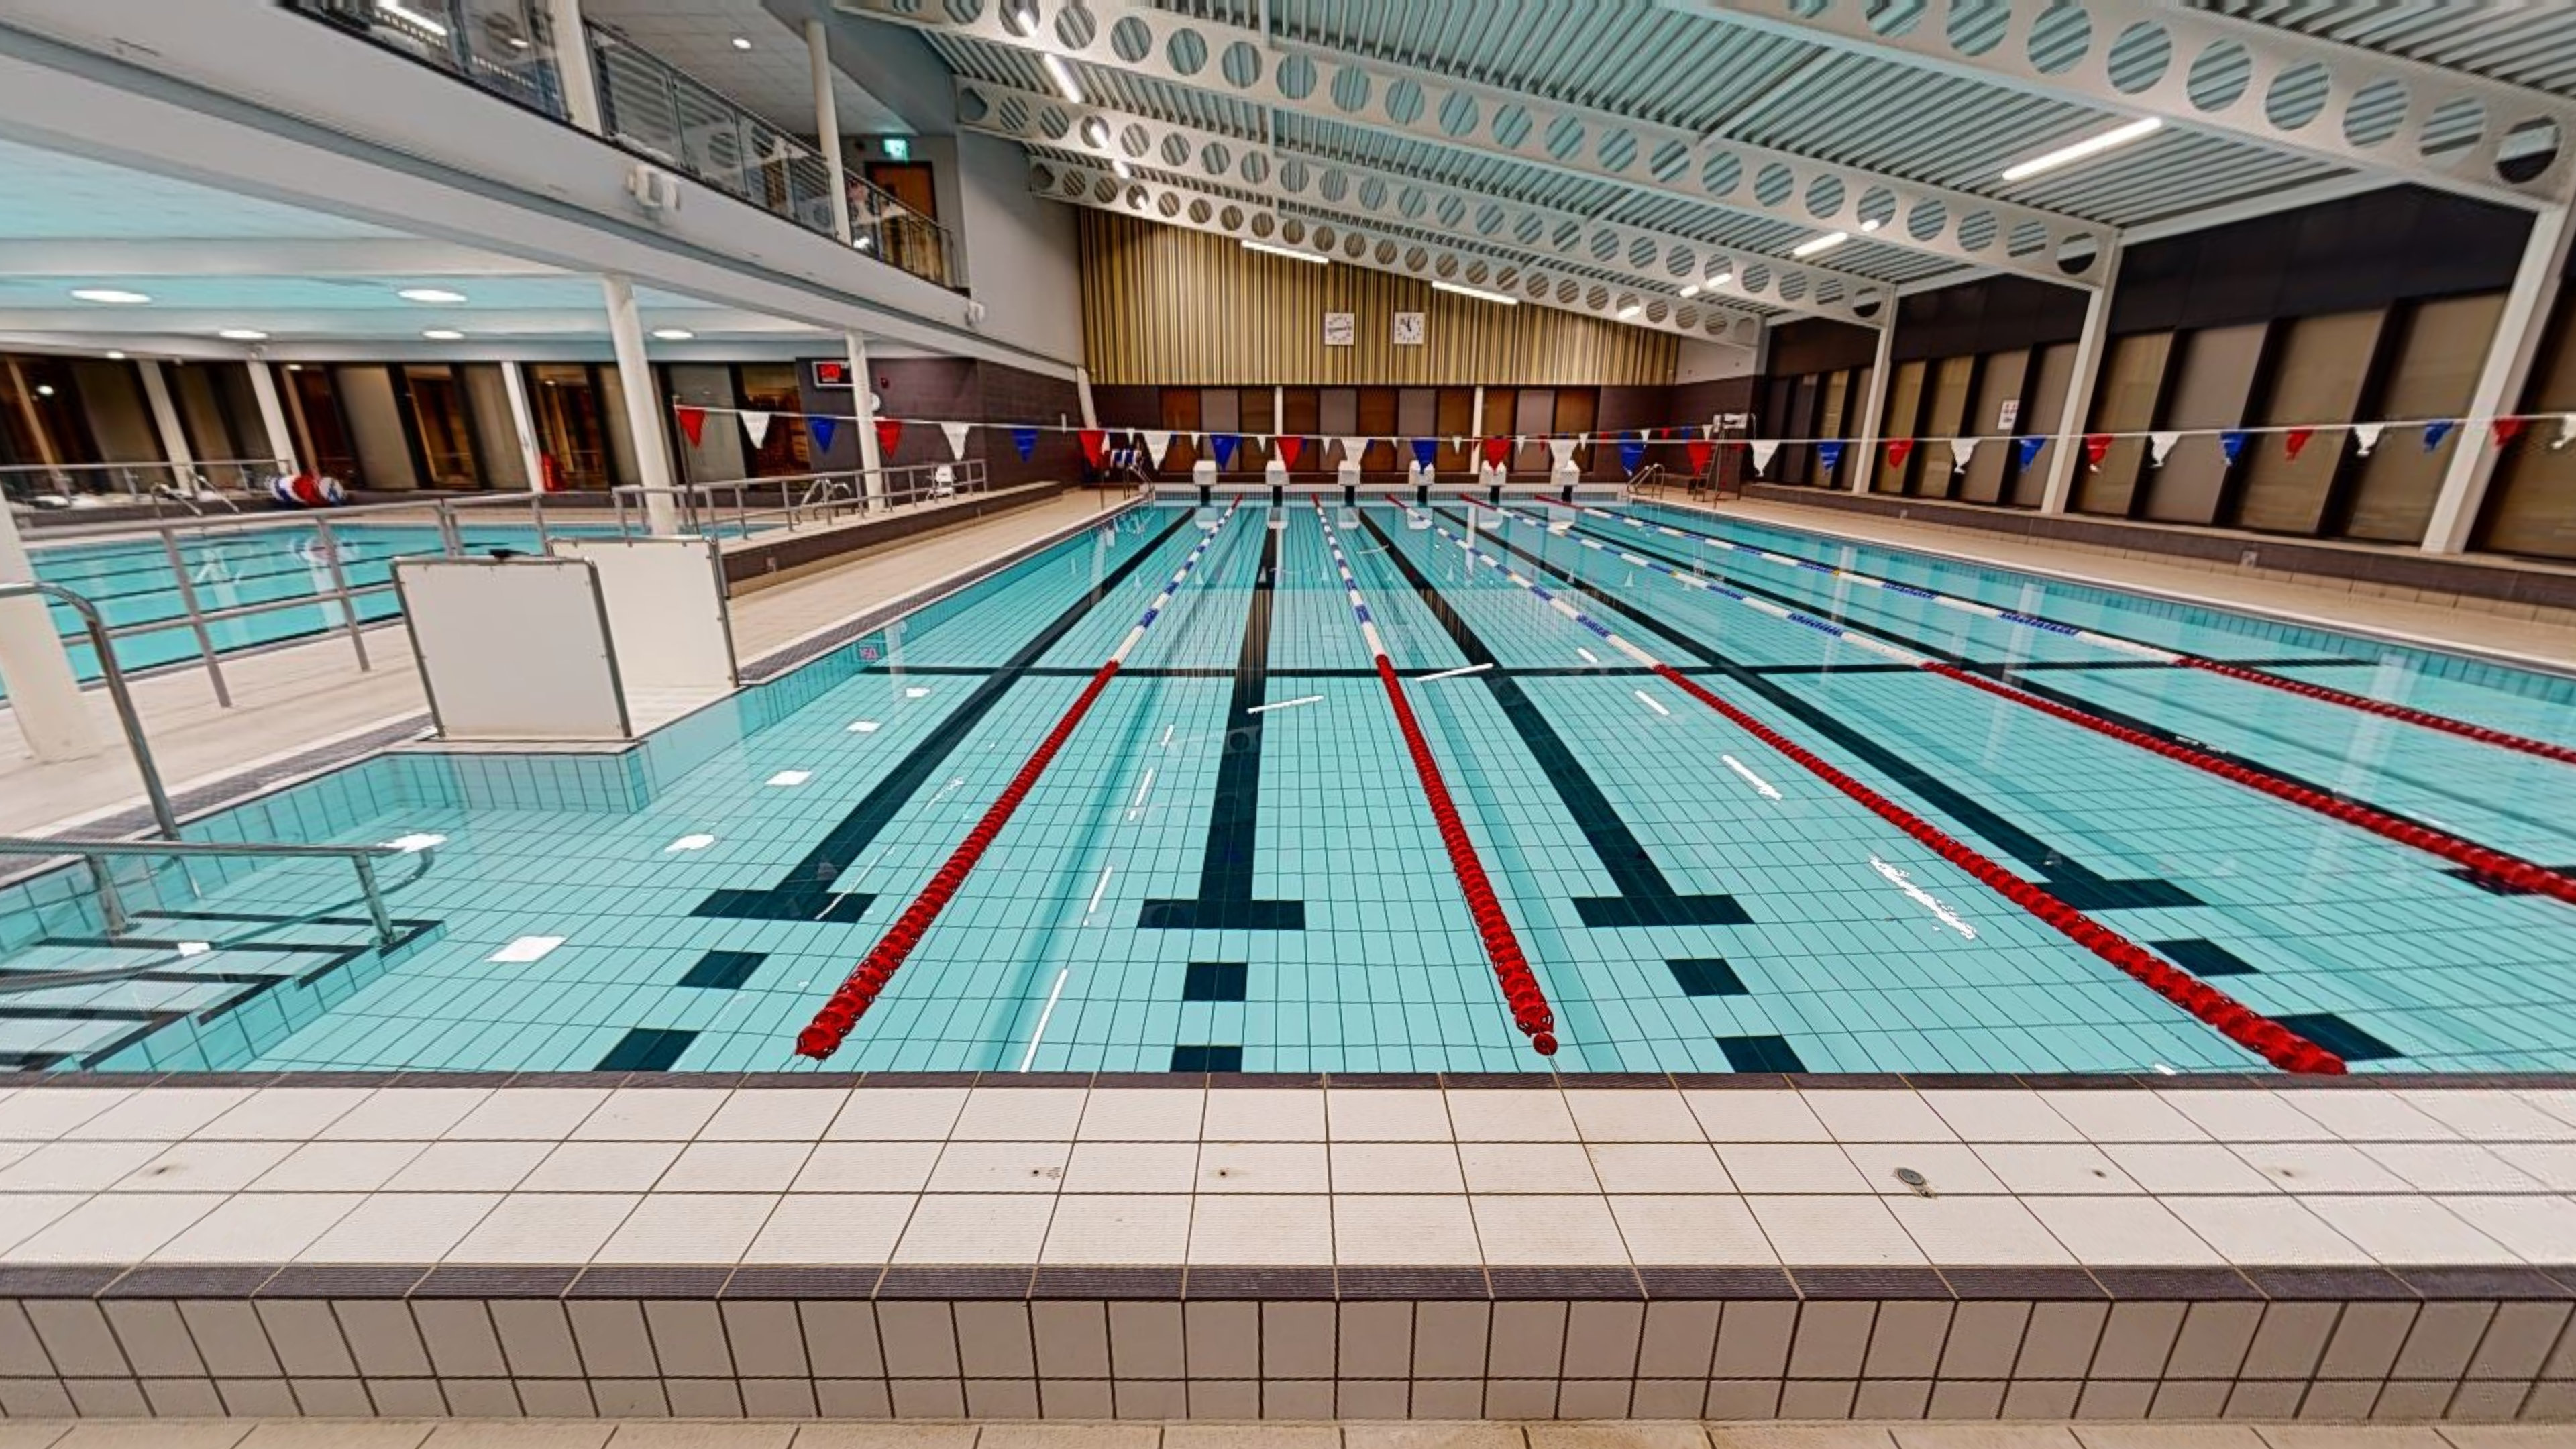 Swimming pool at Andover Leisure Centre